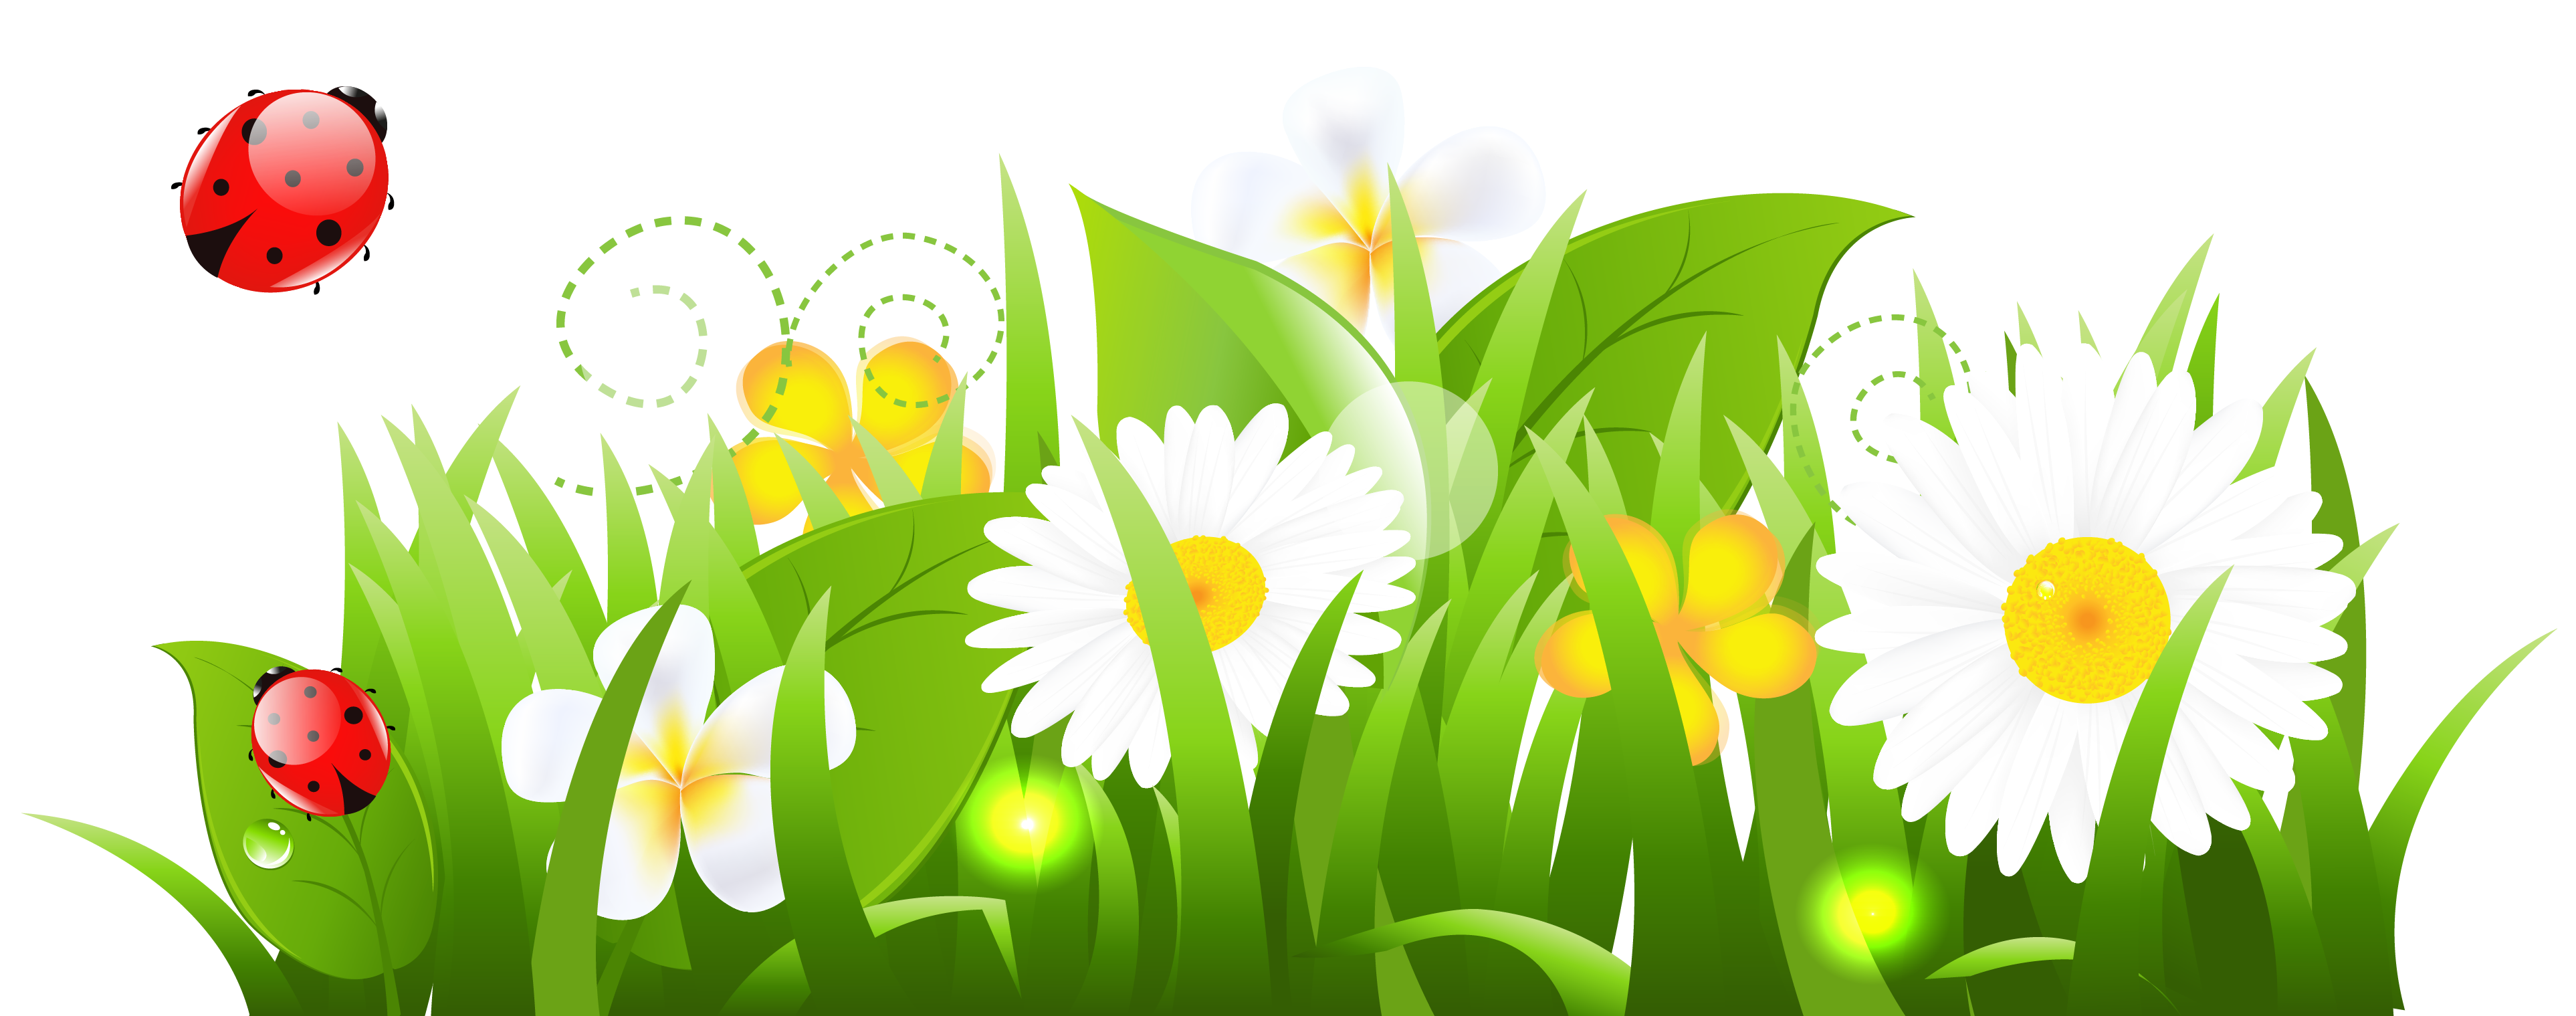 May grass and flowers clipart